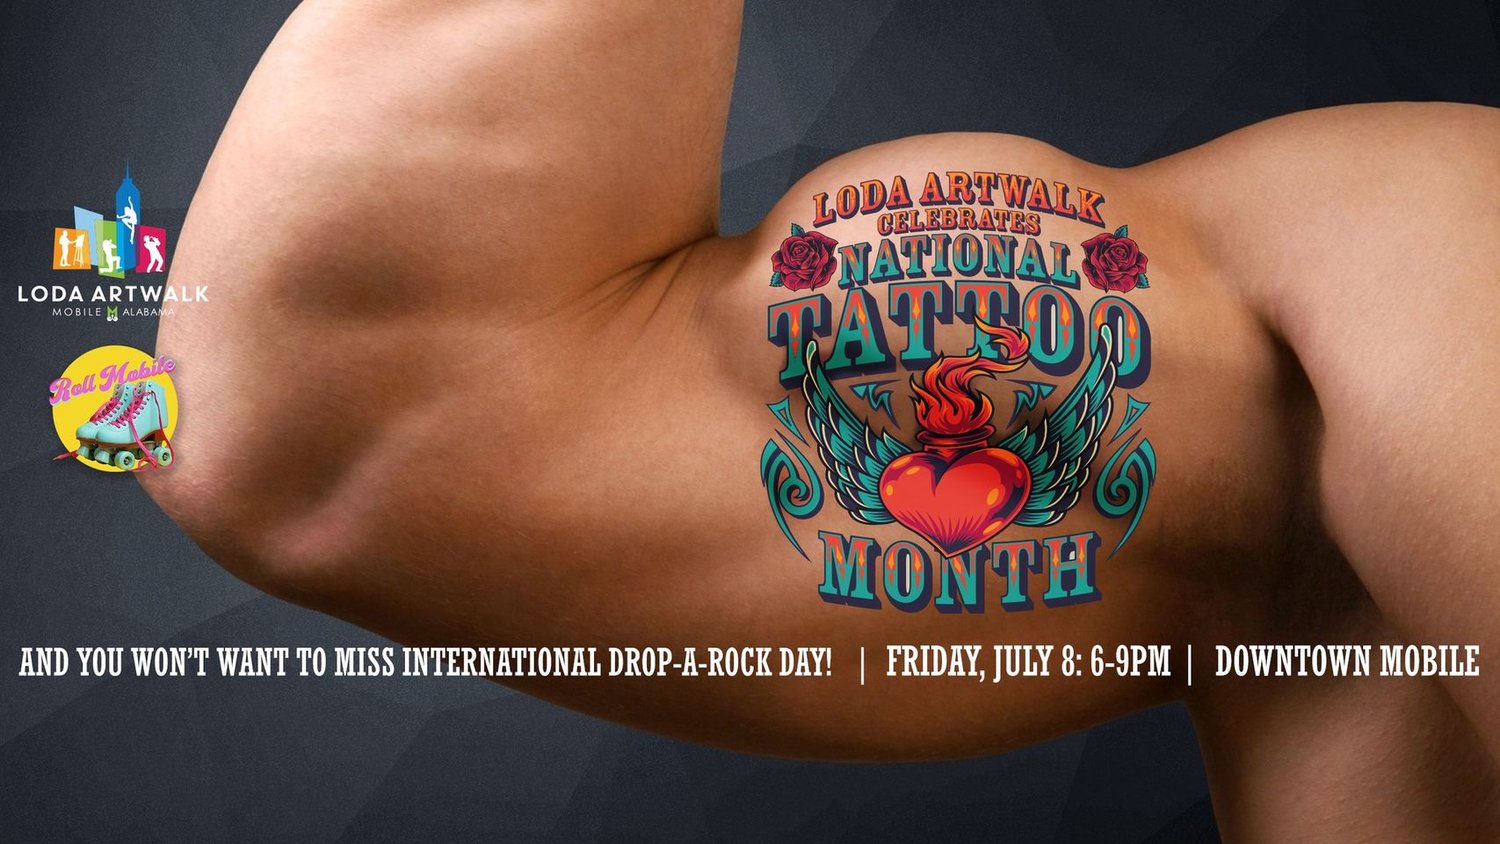 The LoDa Artwalk, national tattoo month and Roll Mobile collide for a fun evening in Bienville Square and downtown Mobile.